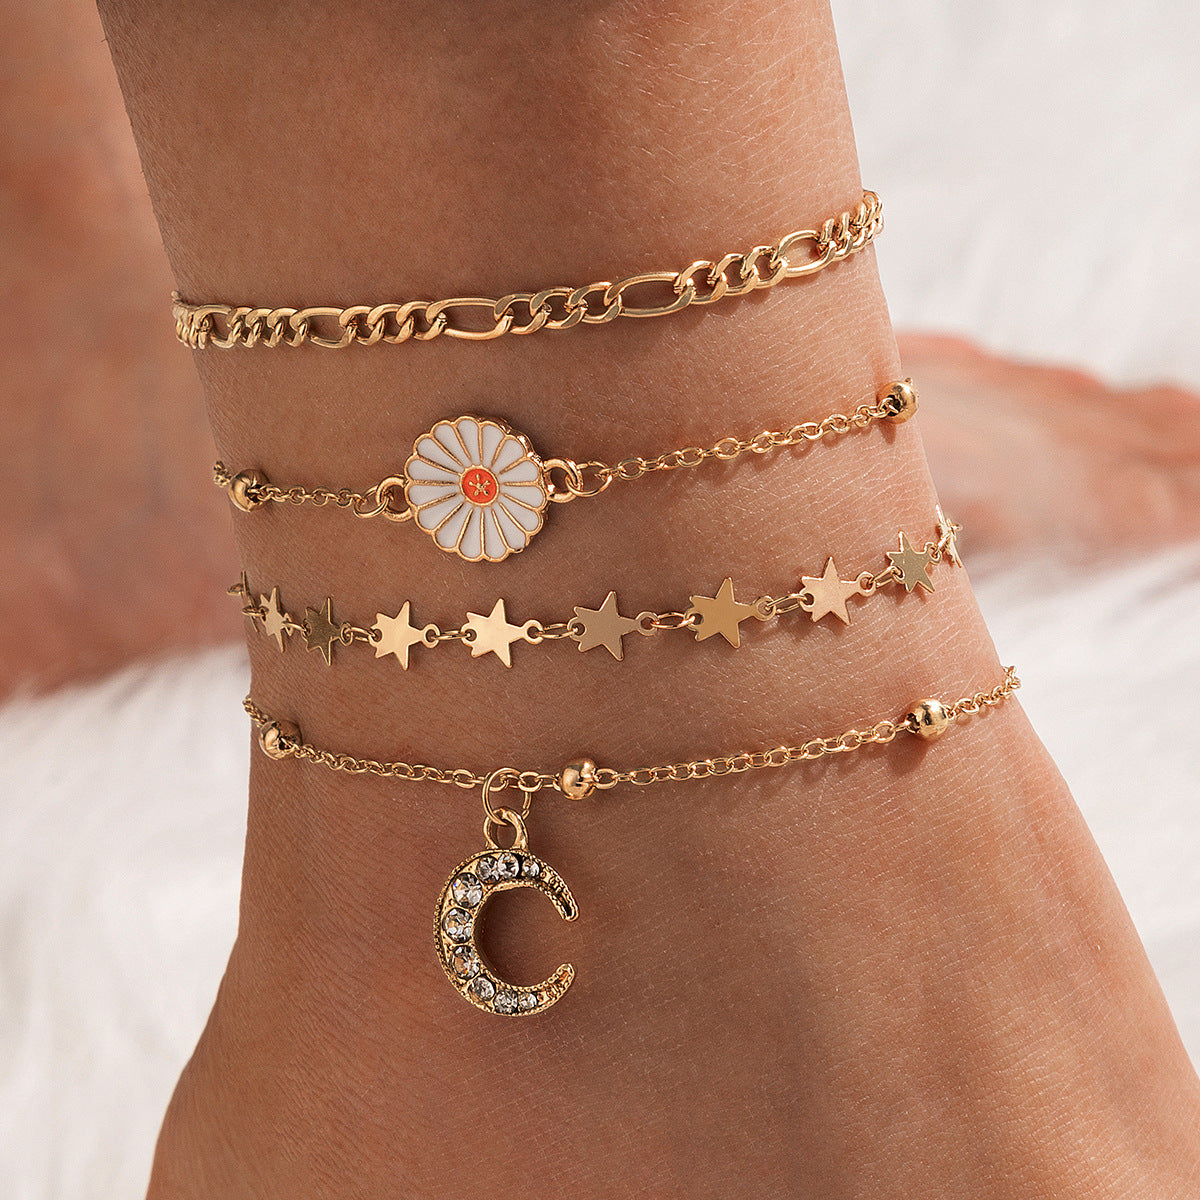 Arzonai new accessories personality thick chain small daisy flower five-pointed star moon 4-piece anklet